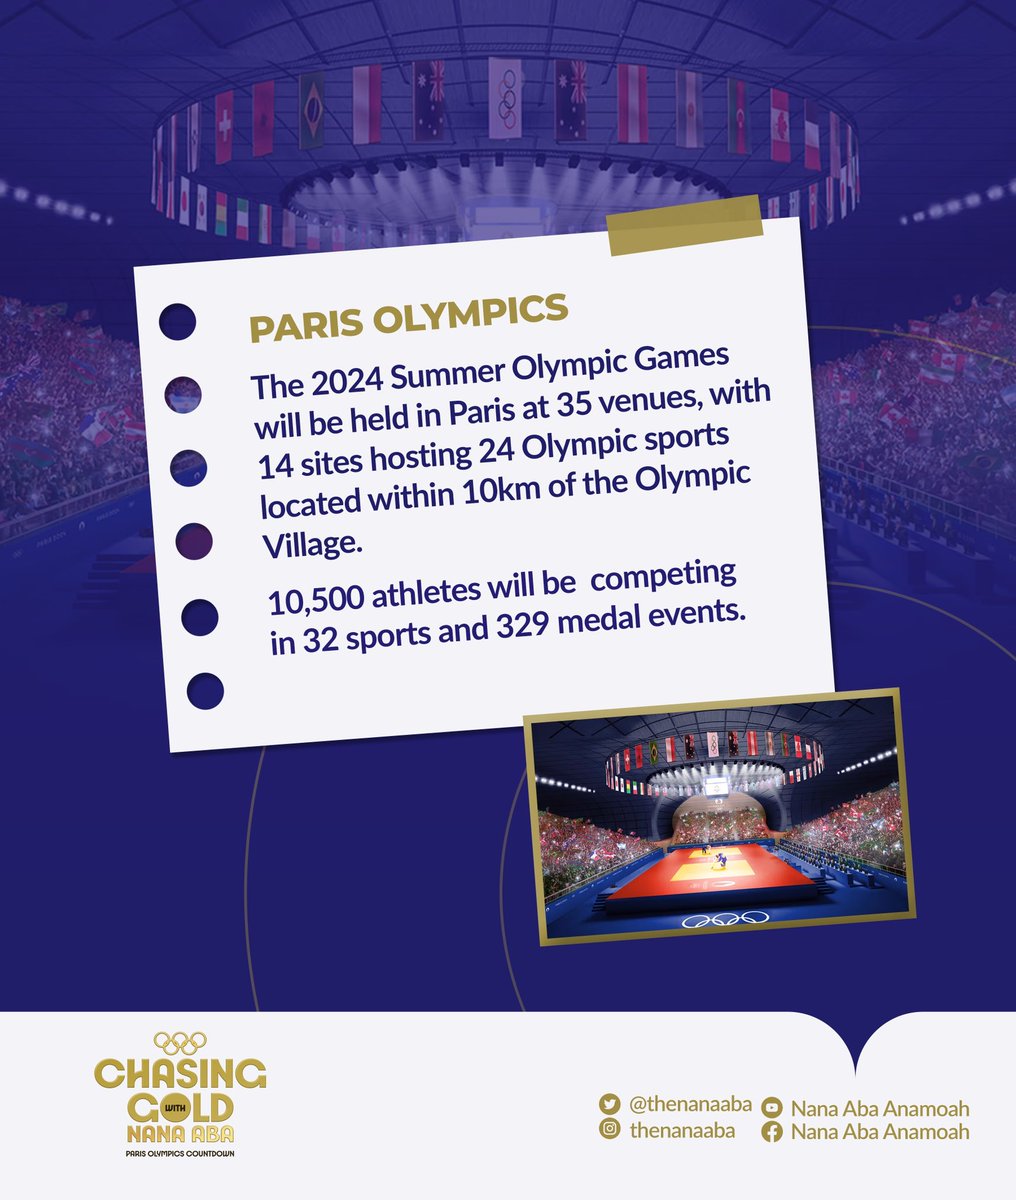 The Paris Olympics will be held at 35 venues. How many venues do we have in Ghana for sports events? 😂😂🤦‍♂️ #ChasingGoldWithNanaAba